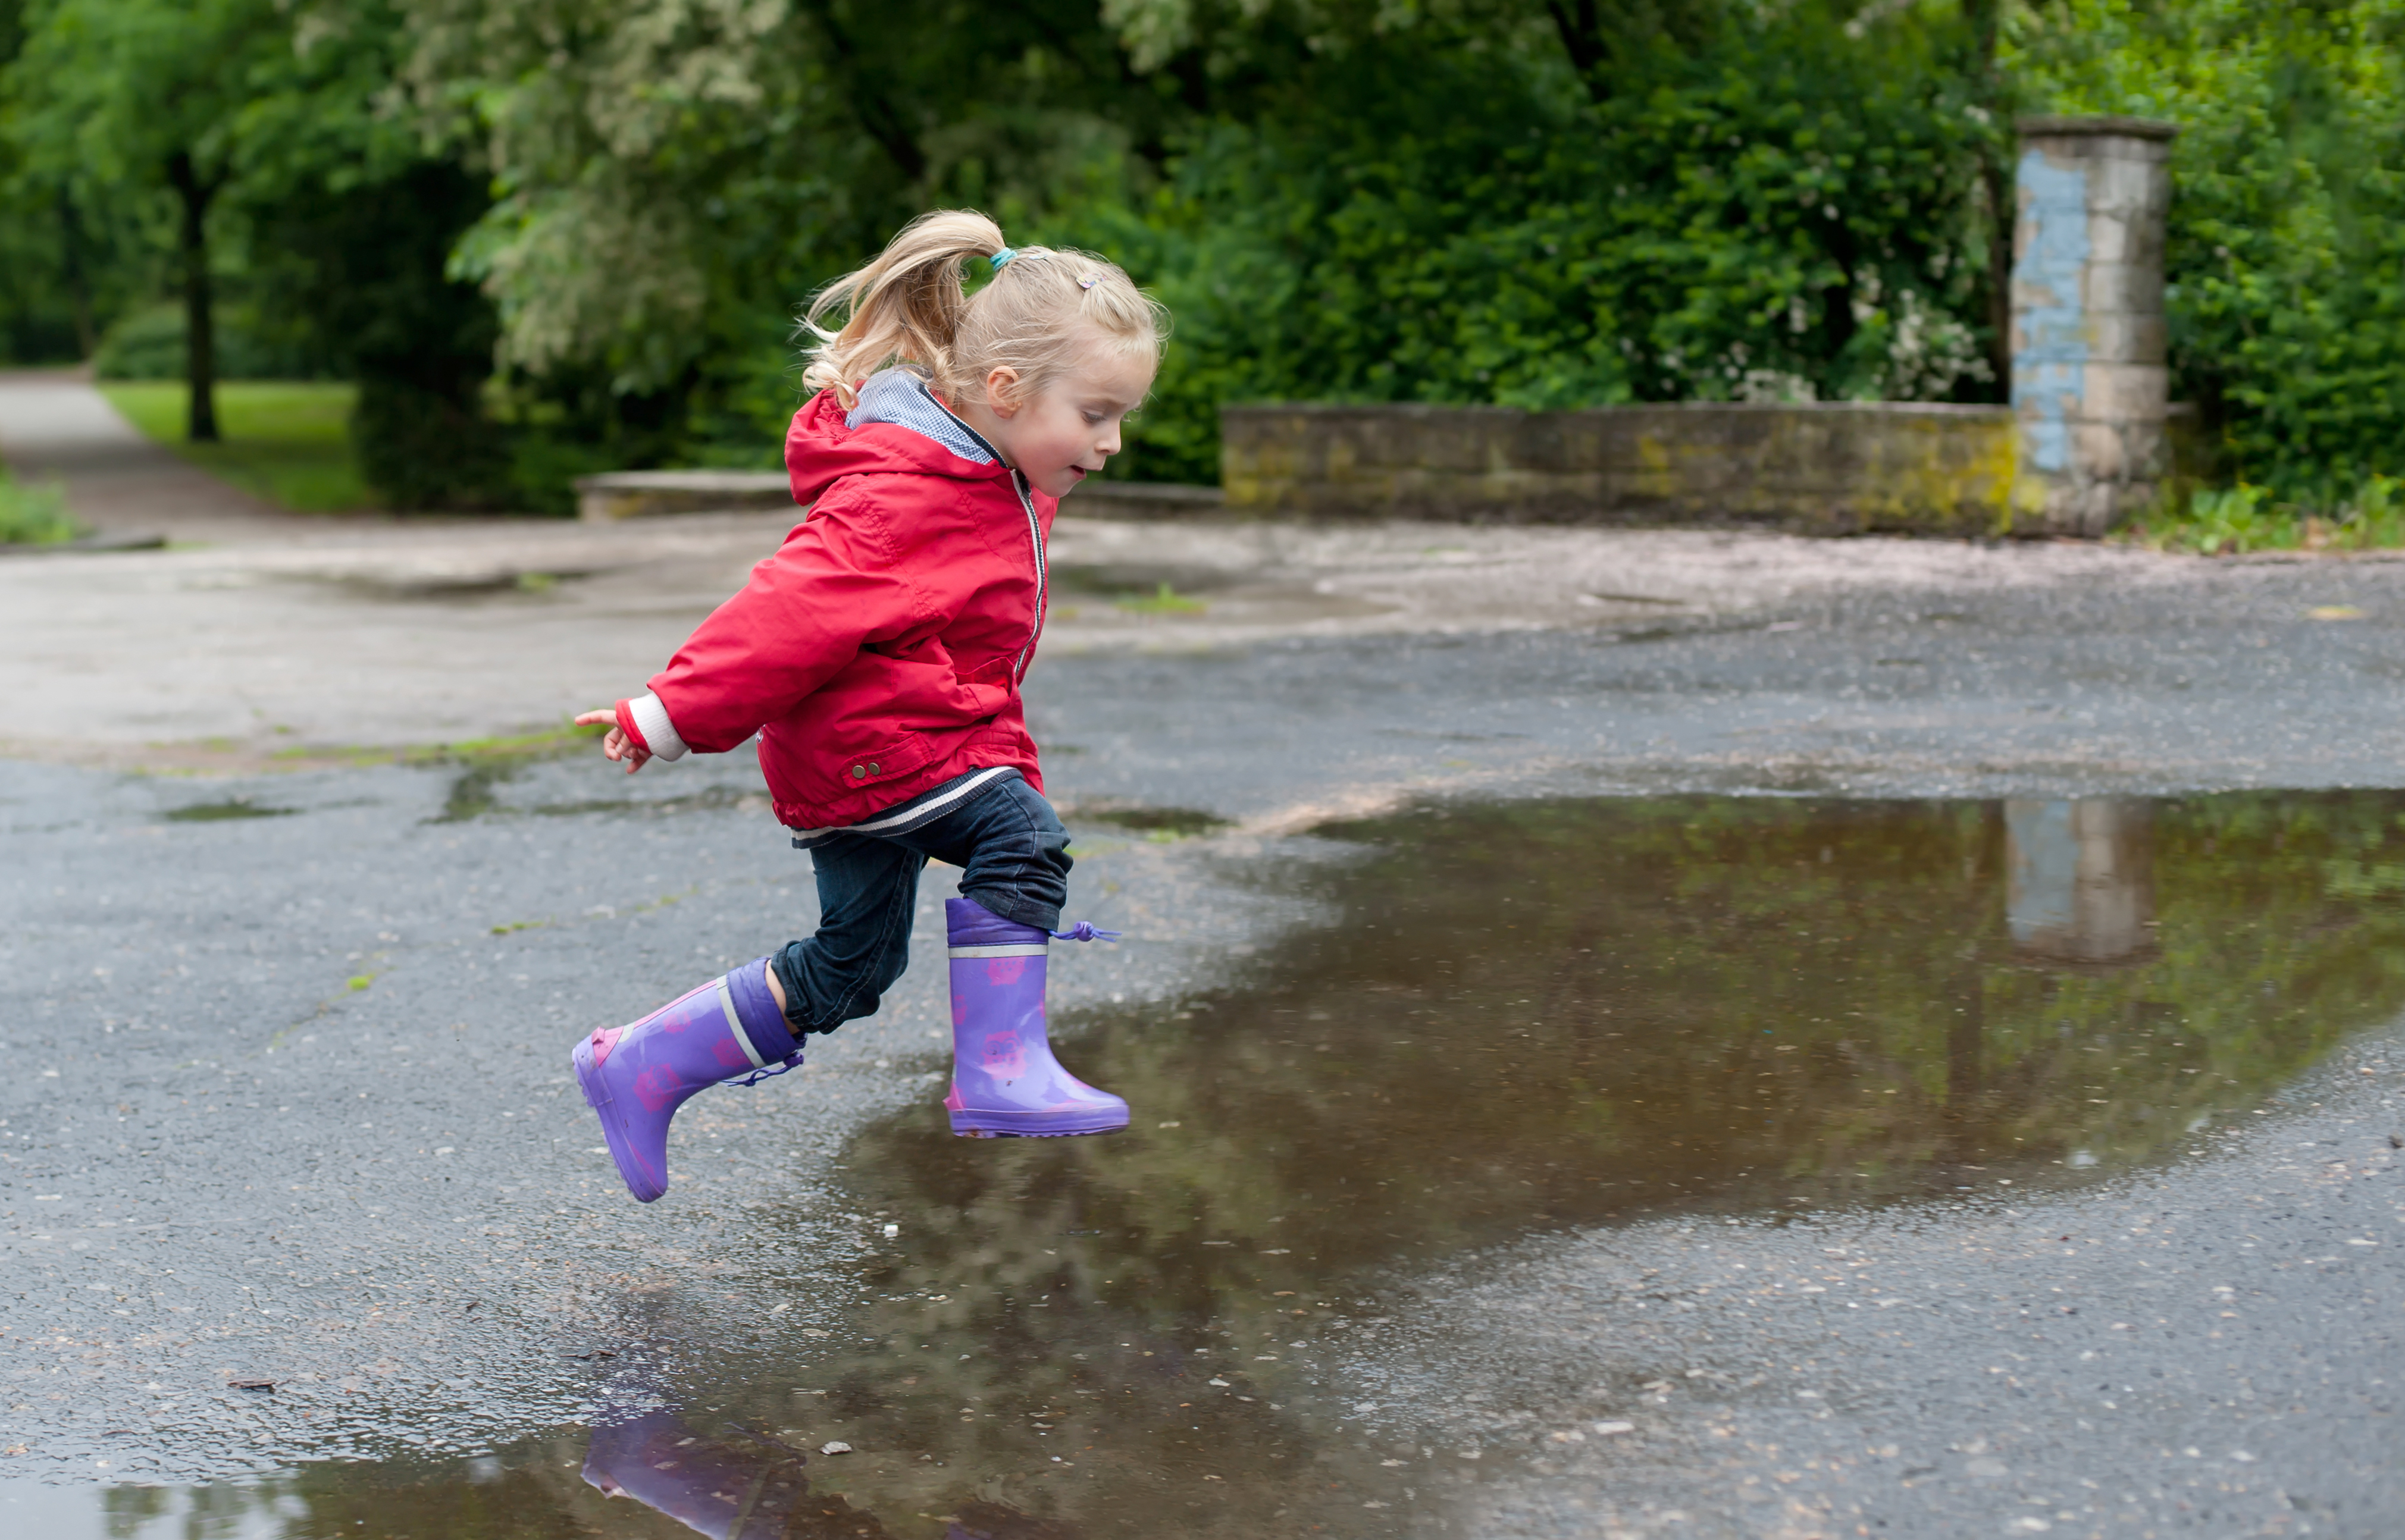 Kid_Jumping_in_Puddle.jpg